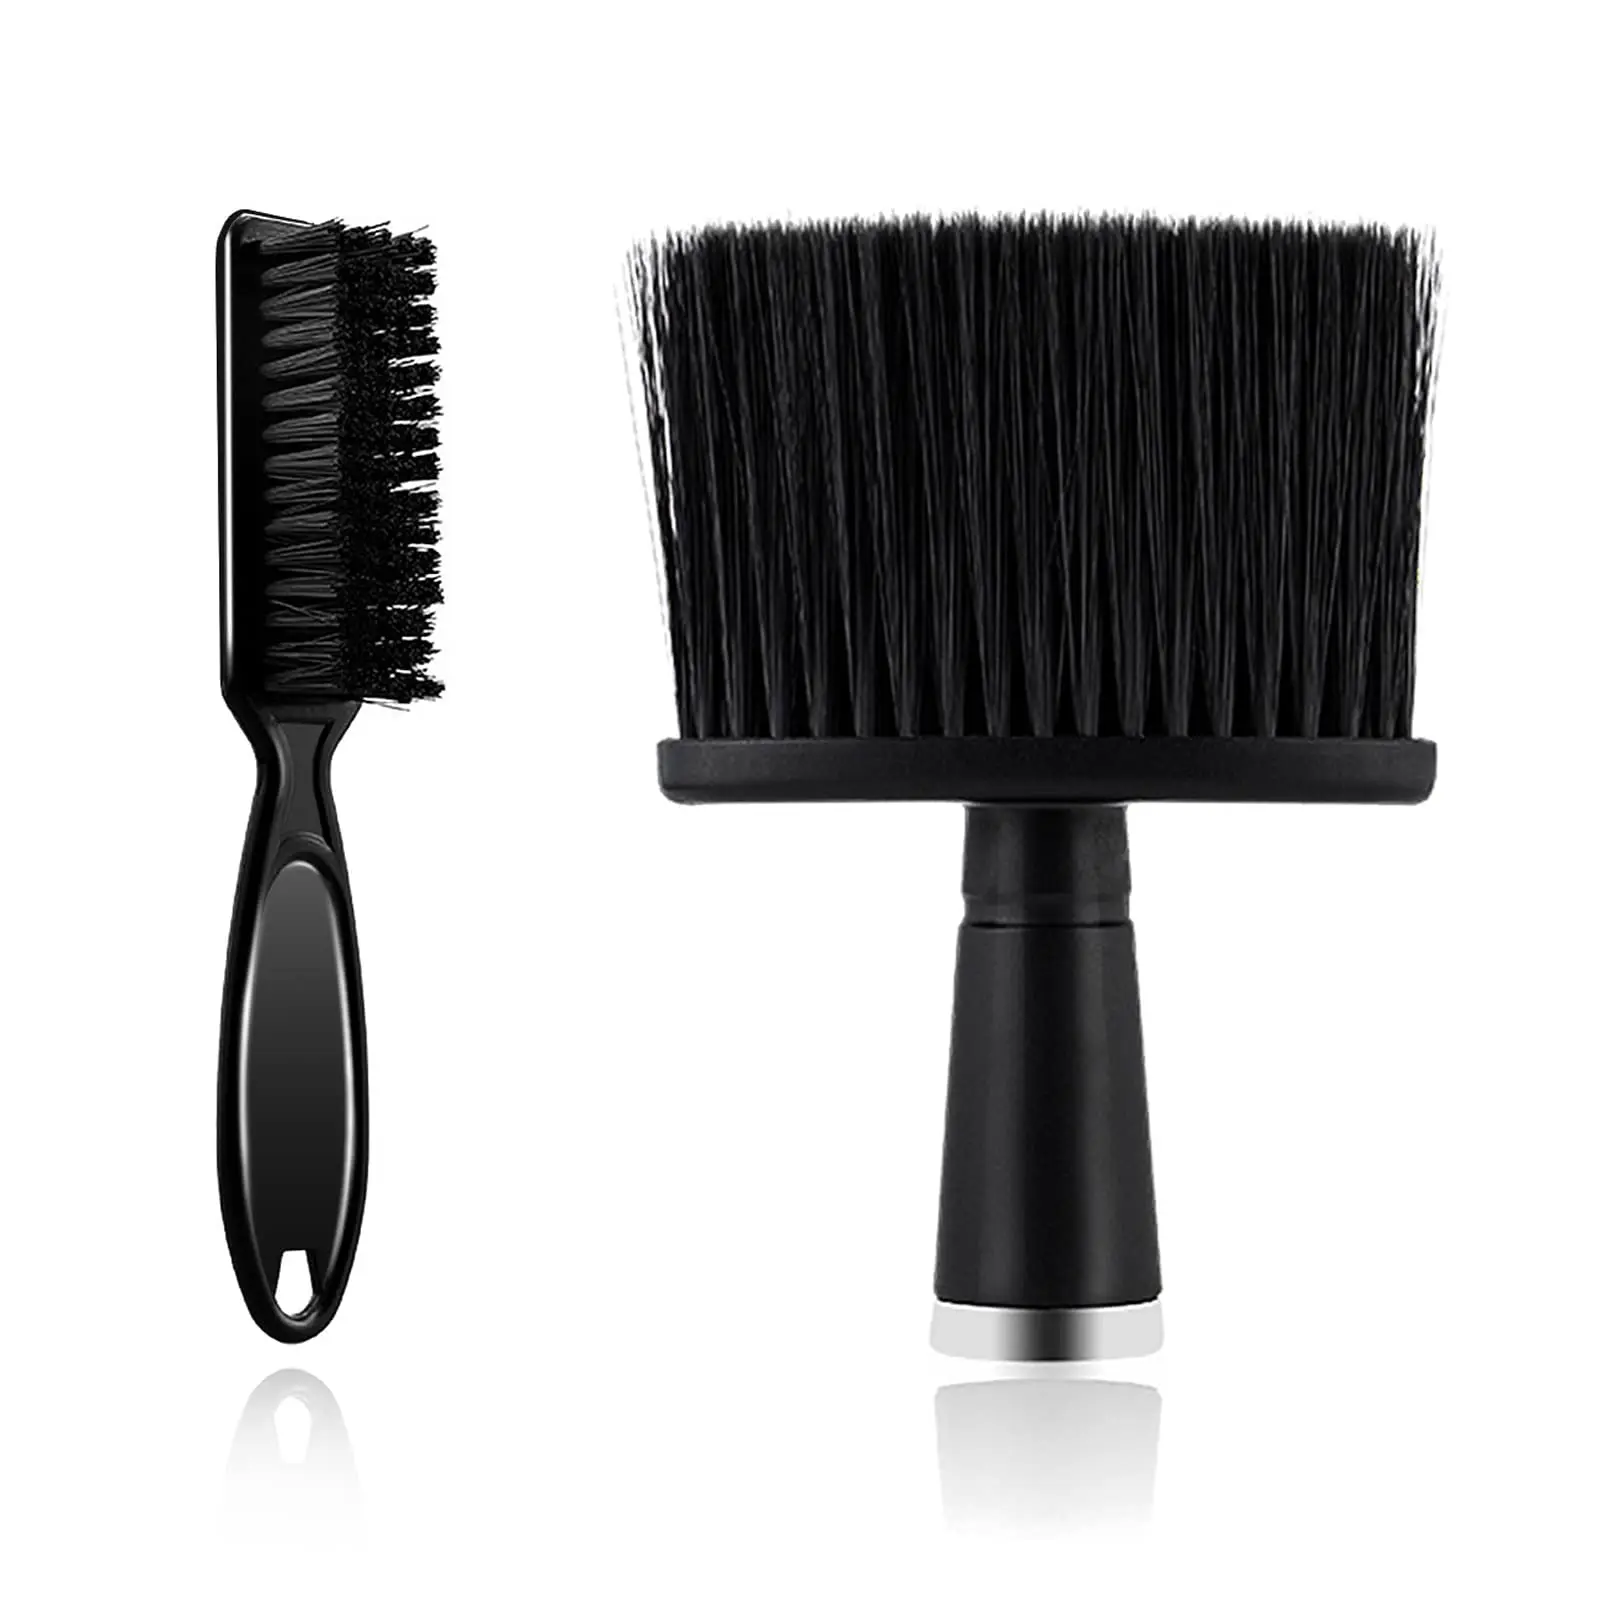 2PCS/Set Barber Brush Hairdresser Blade Clean Brush Neck Duster Brushes Clipper Cleaning Brush Styling Brush Tool 2pcs kgx 608 welding maintenance clean tools assistant for pcba repair tool set multi function double side 6 in 1 tool kit